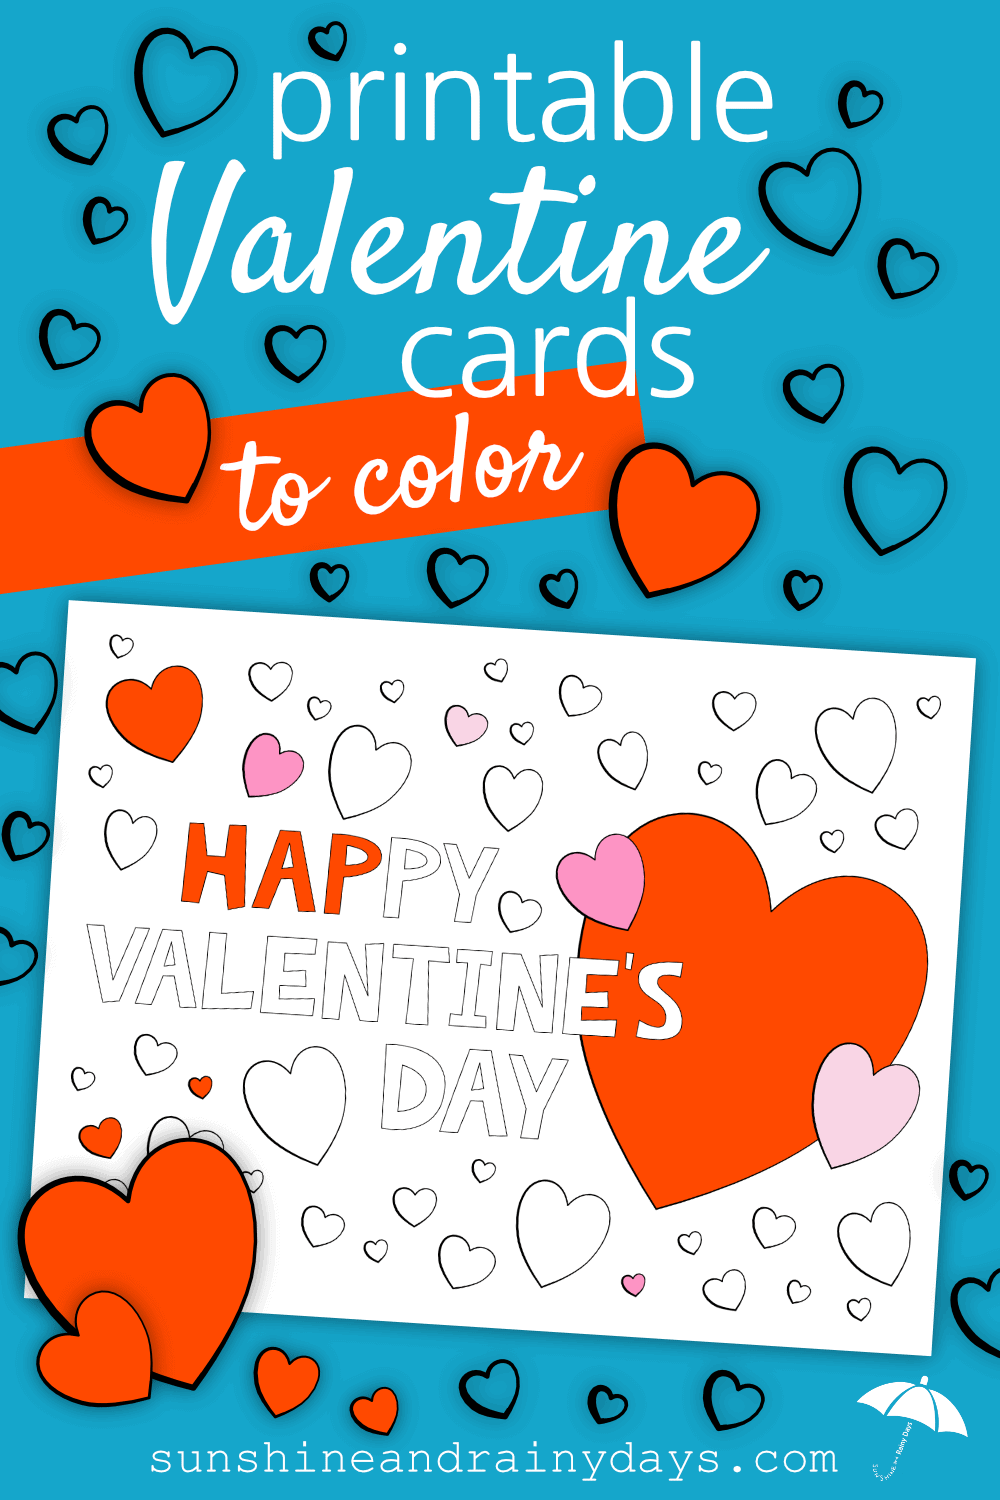 Valentine's Day Cards are all about creativity! Nothing says LOVE more than a card made with your own two hands. Whether you're super crafty or don't have a creative bone in your body, our Printable Valentine Cards To Color are the perfect solution!